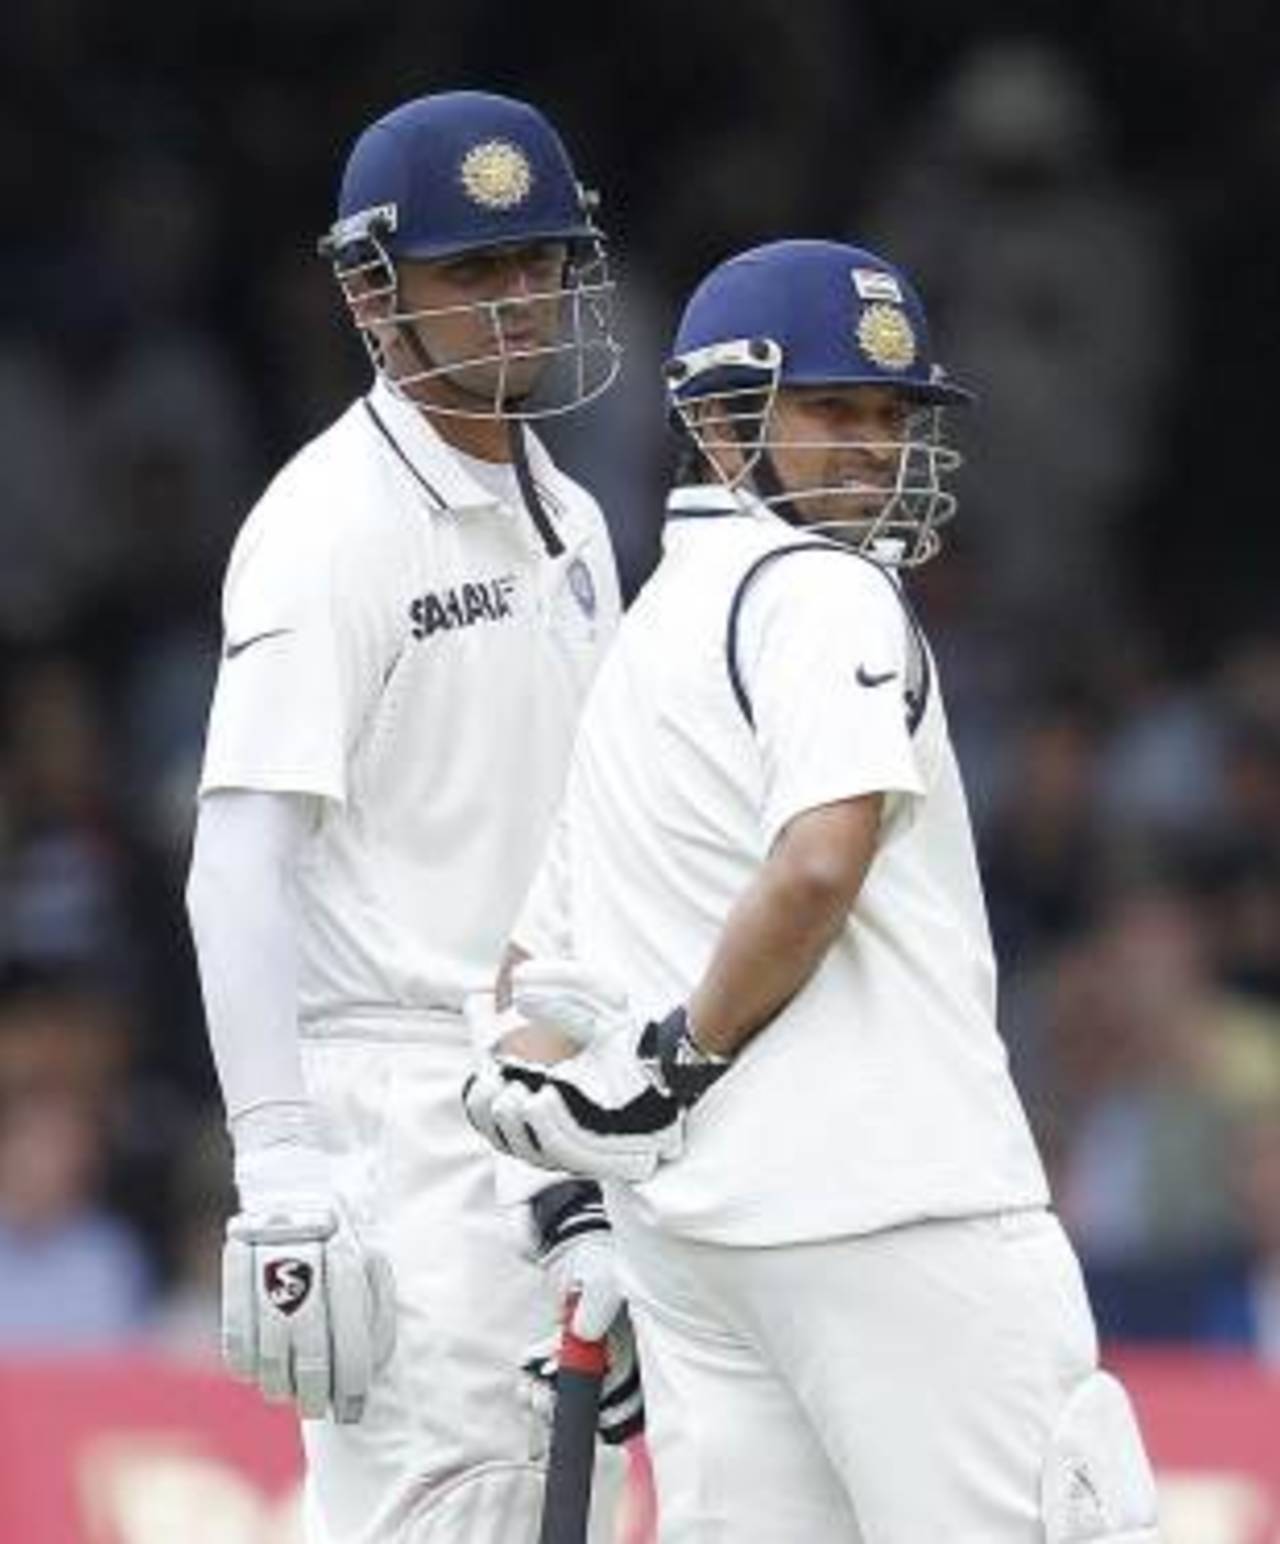 Rahul Dravid and Sachin Tendulkar steadied India after the openers fell, England v India, 1st Test, Lord's, 3rd day, July 23, 2011